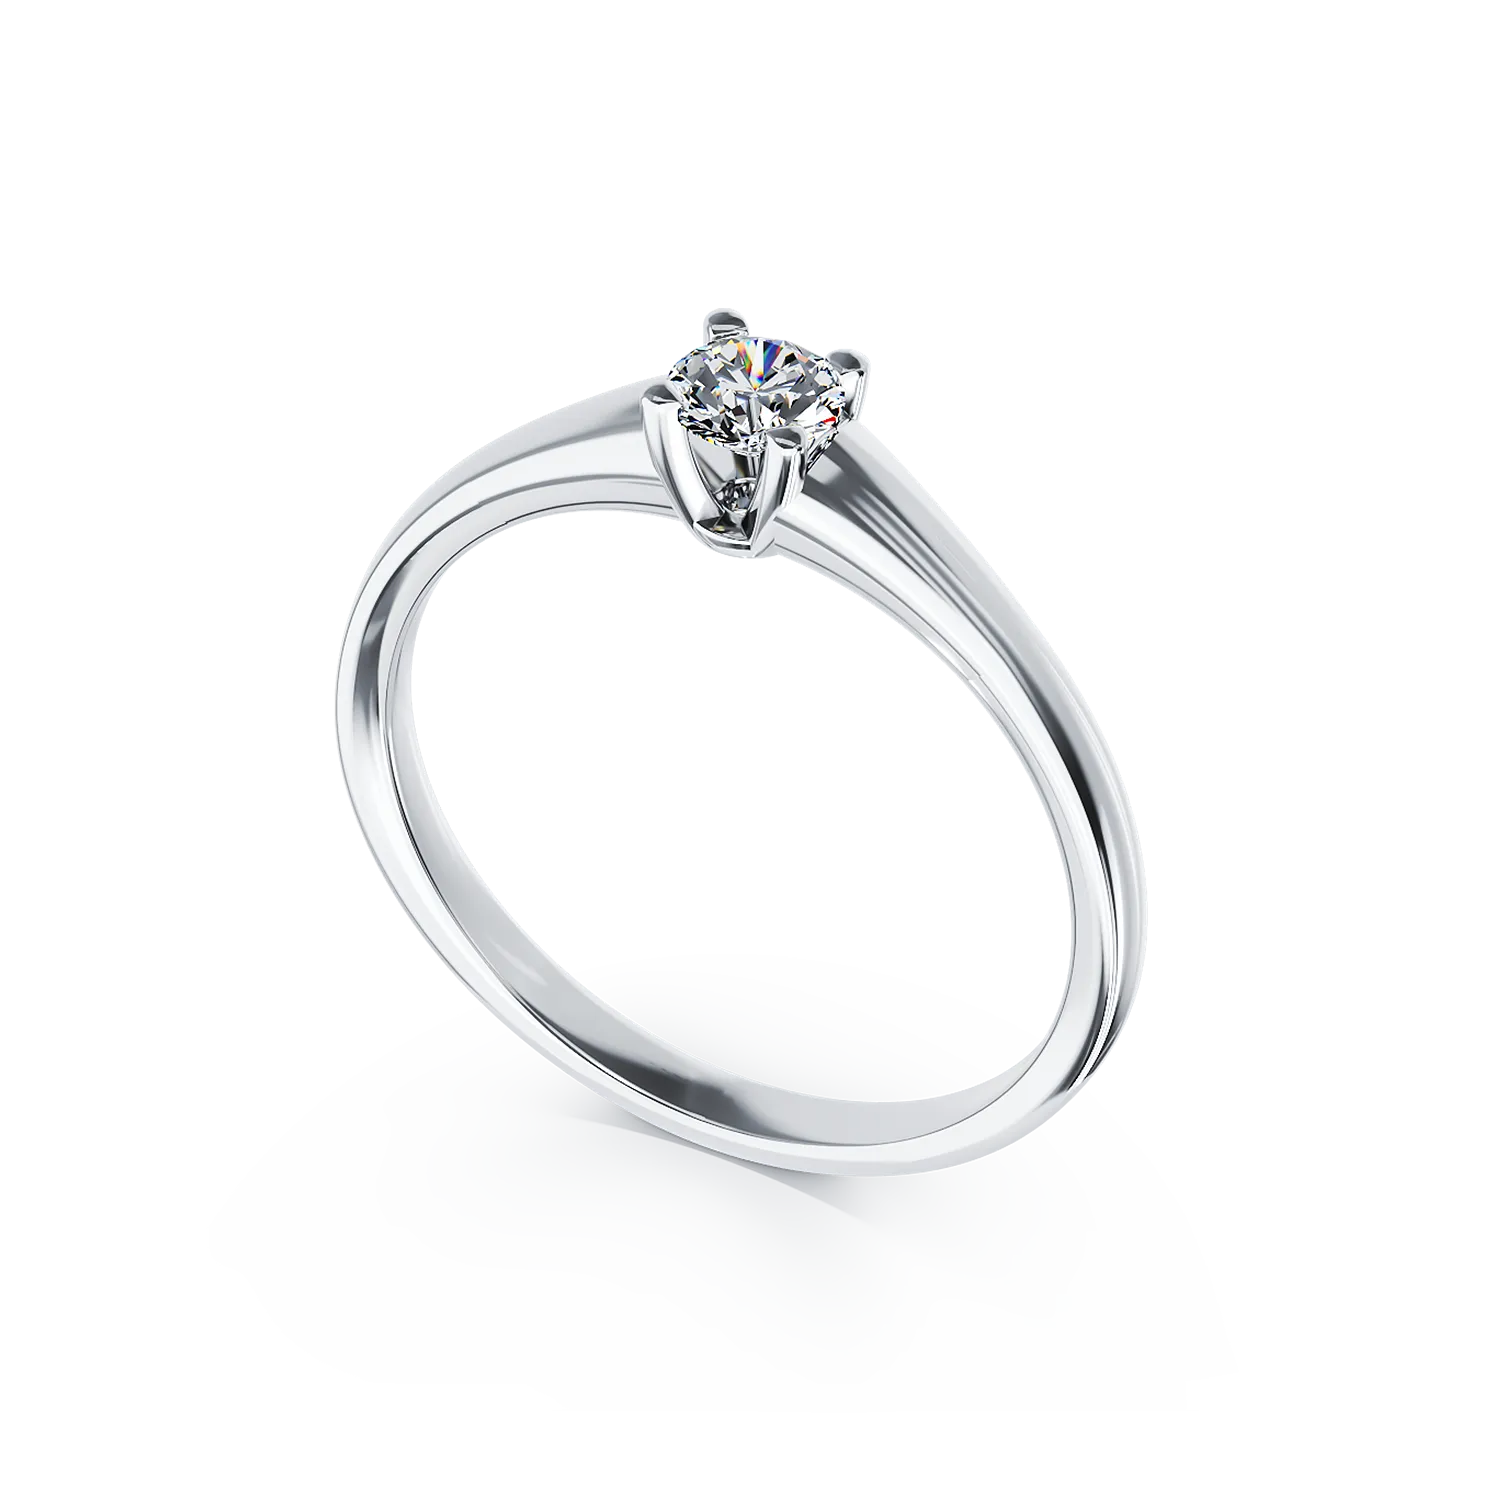 18K white gold engagement ring with a 0.205ct solitaire diamond